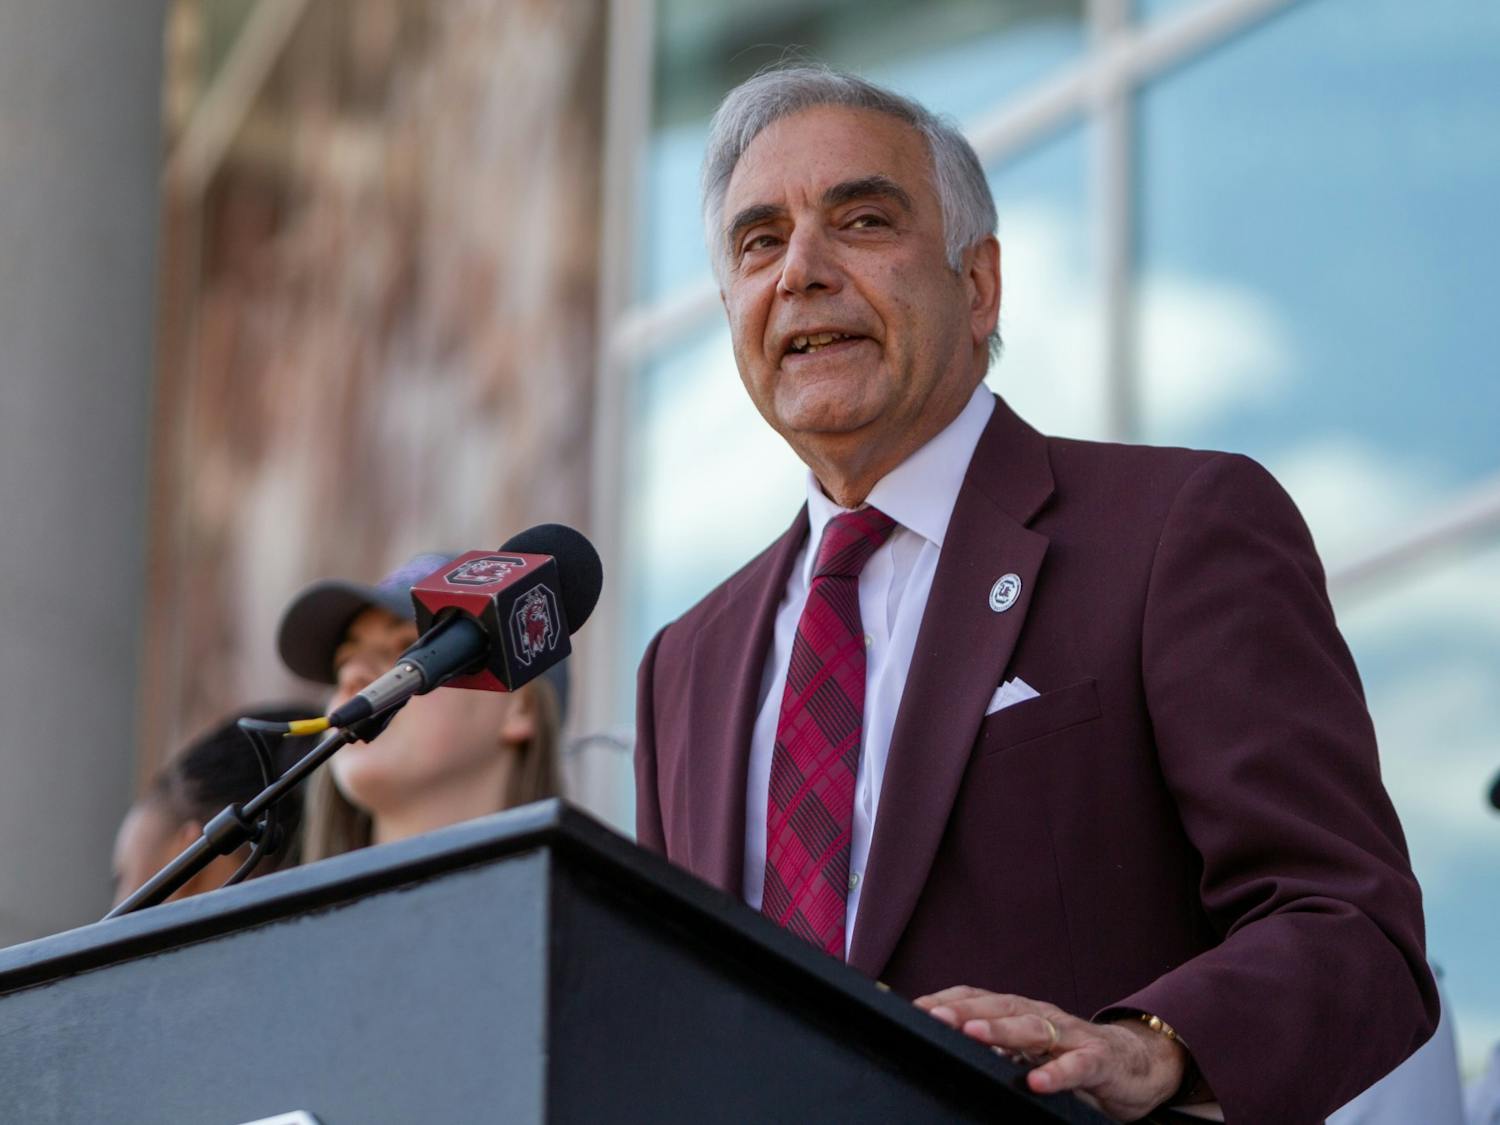 University of South Carolina interim university President Harris Pastides addresses the crowd at Colonial Life Arena on April 4, 2022. Pastides recognized the accomplishments of head coach Dawn Staley and her team.